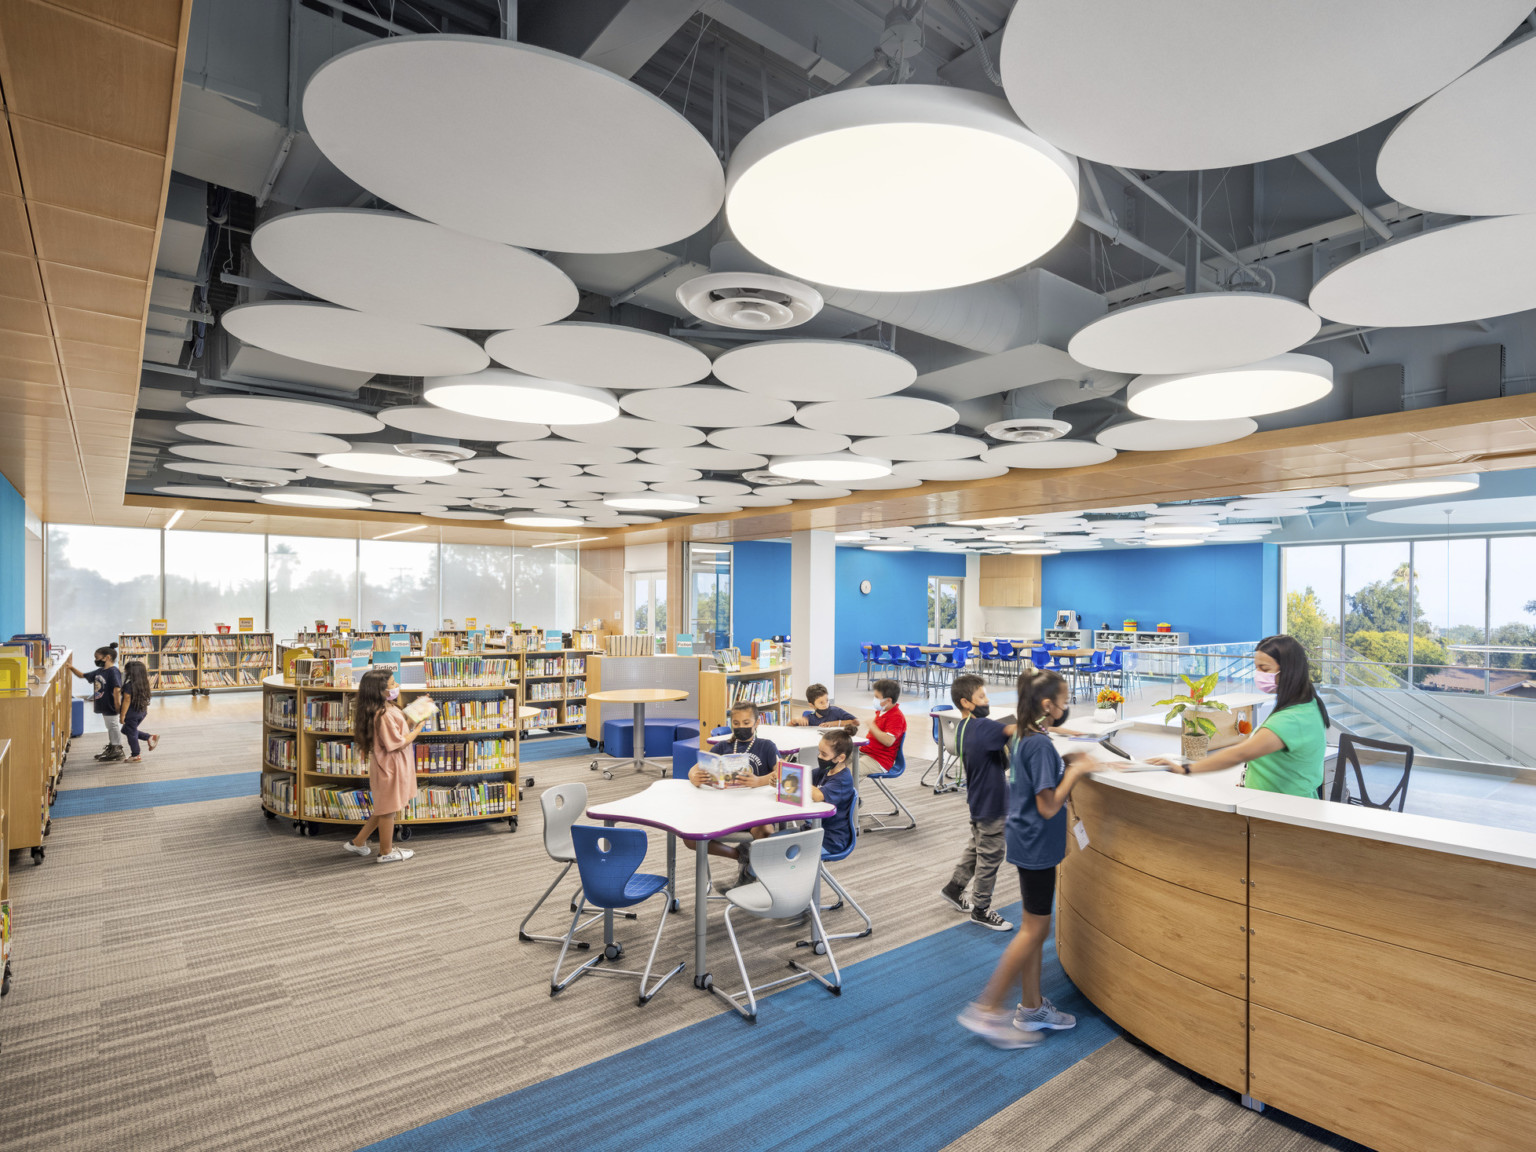 Interior upper level library, mixed flexible seating dispersed among bookshelves. White round accents on ceiling match lights